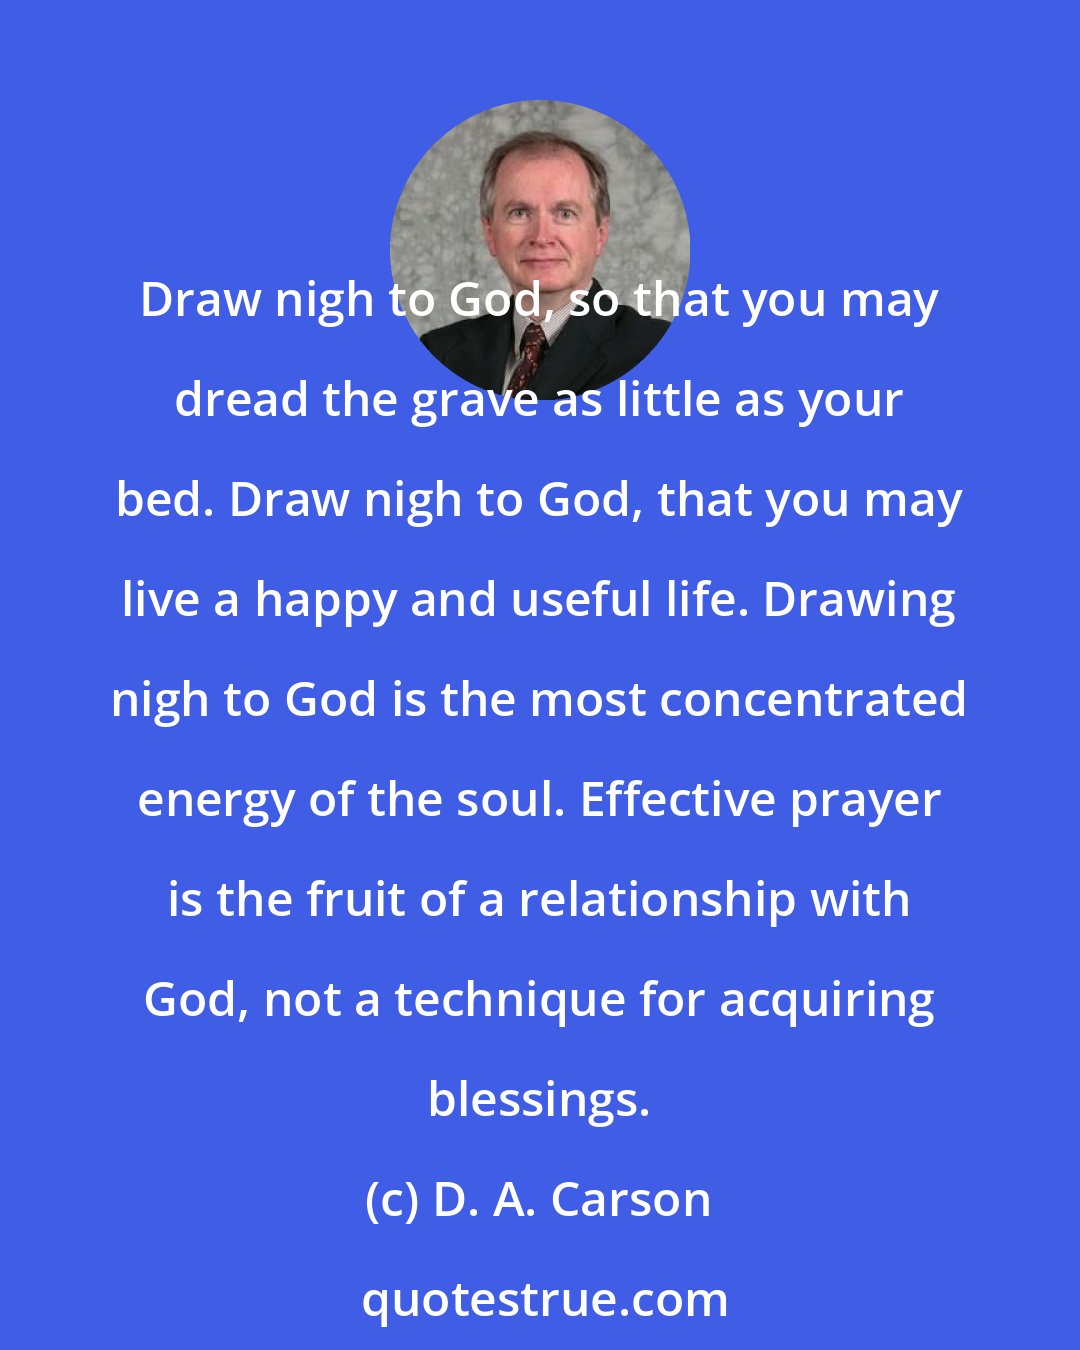 D. A. Carson: Draw nigh to God, so that you may dread the grave as little as your bed. Draw nigh to God, that you may live a happy and useful life. Drawing nigh to God is the most concentrated energy of the soul. Effective prayer is the fruit of a relationship with God, not a technique for acquiring blessings.